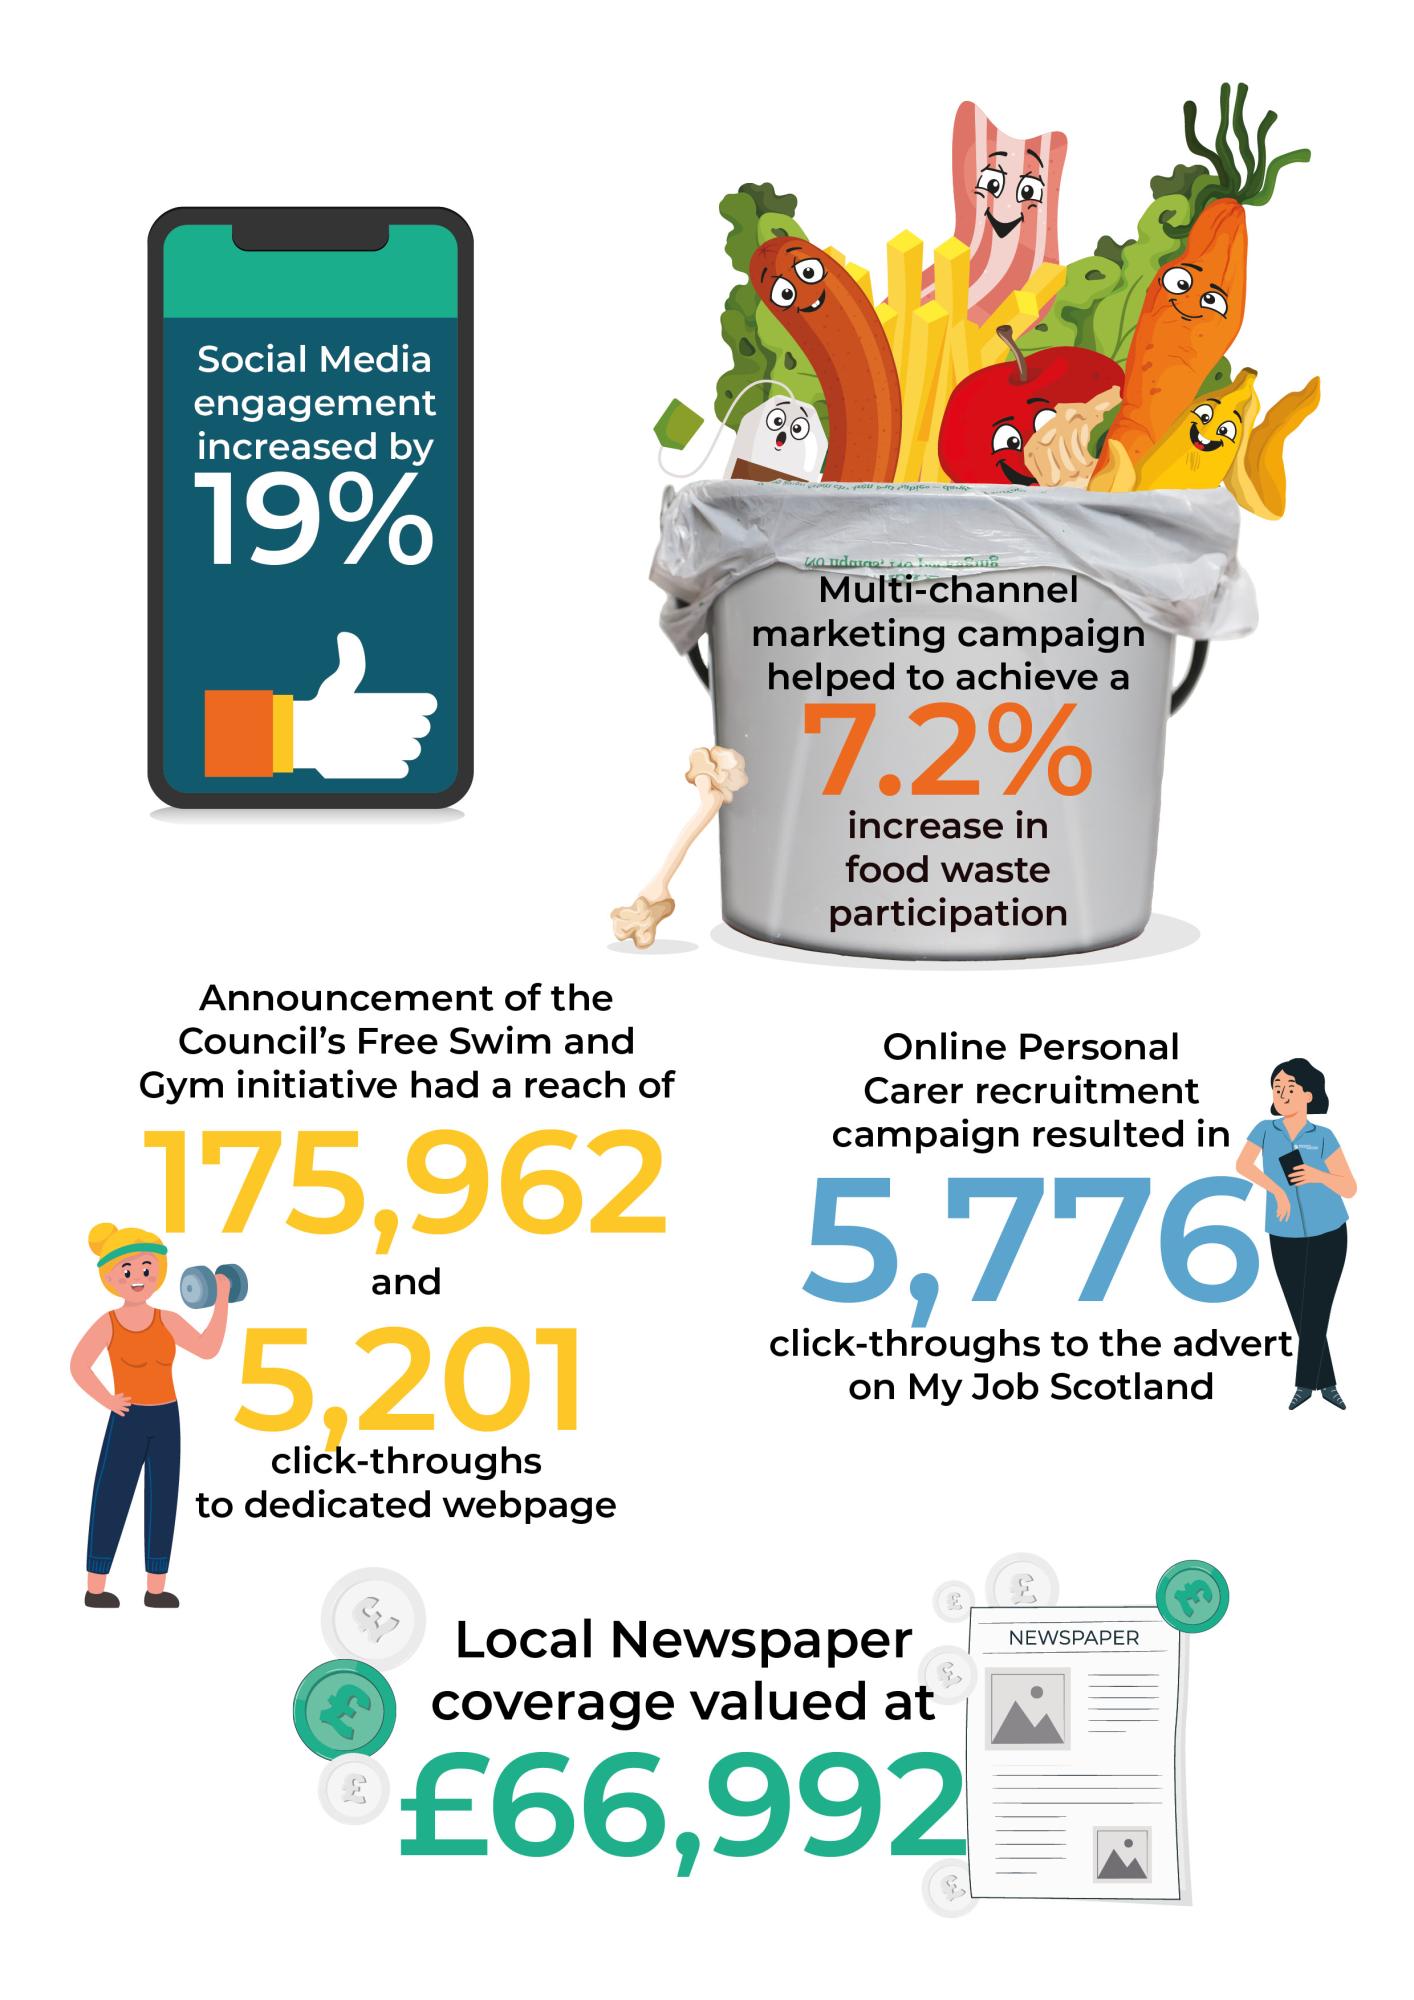 Info graphic of phone social media engagement 19%, Bin with food waste increase of 7.2%,  Free swim and gym initiative 175,962 and 5,201 click throughs on webpage, Online carer recruitment 5,776 click throughs on my job scotland, Local newspaper coverage £66,992